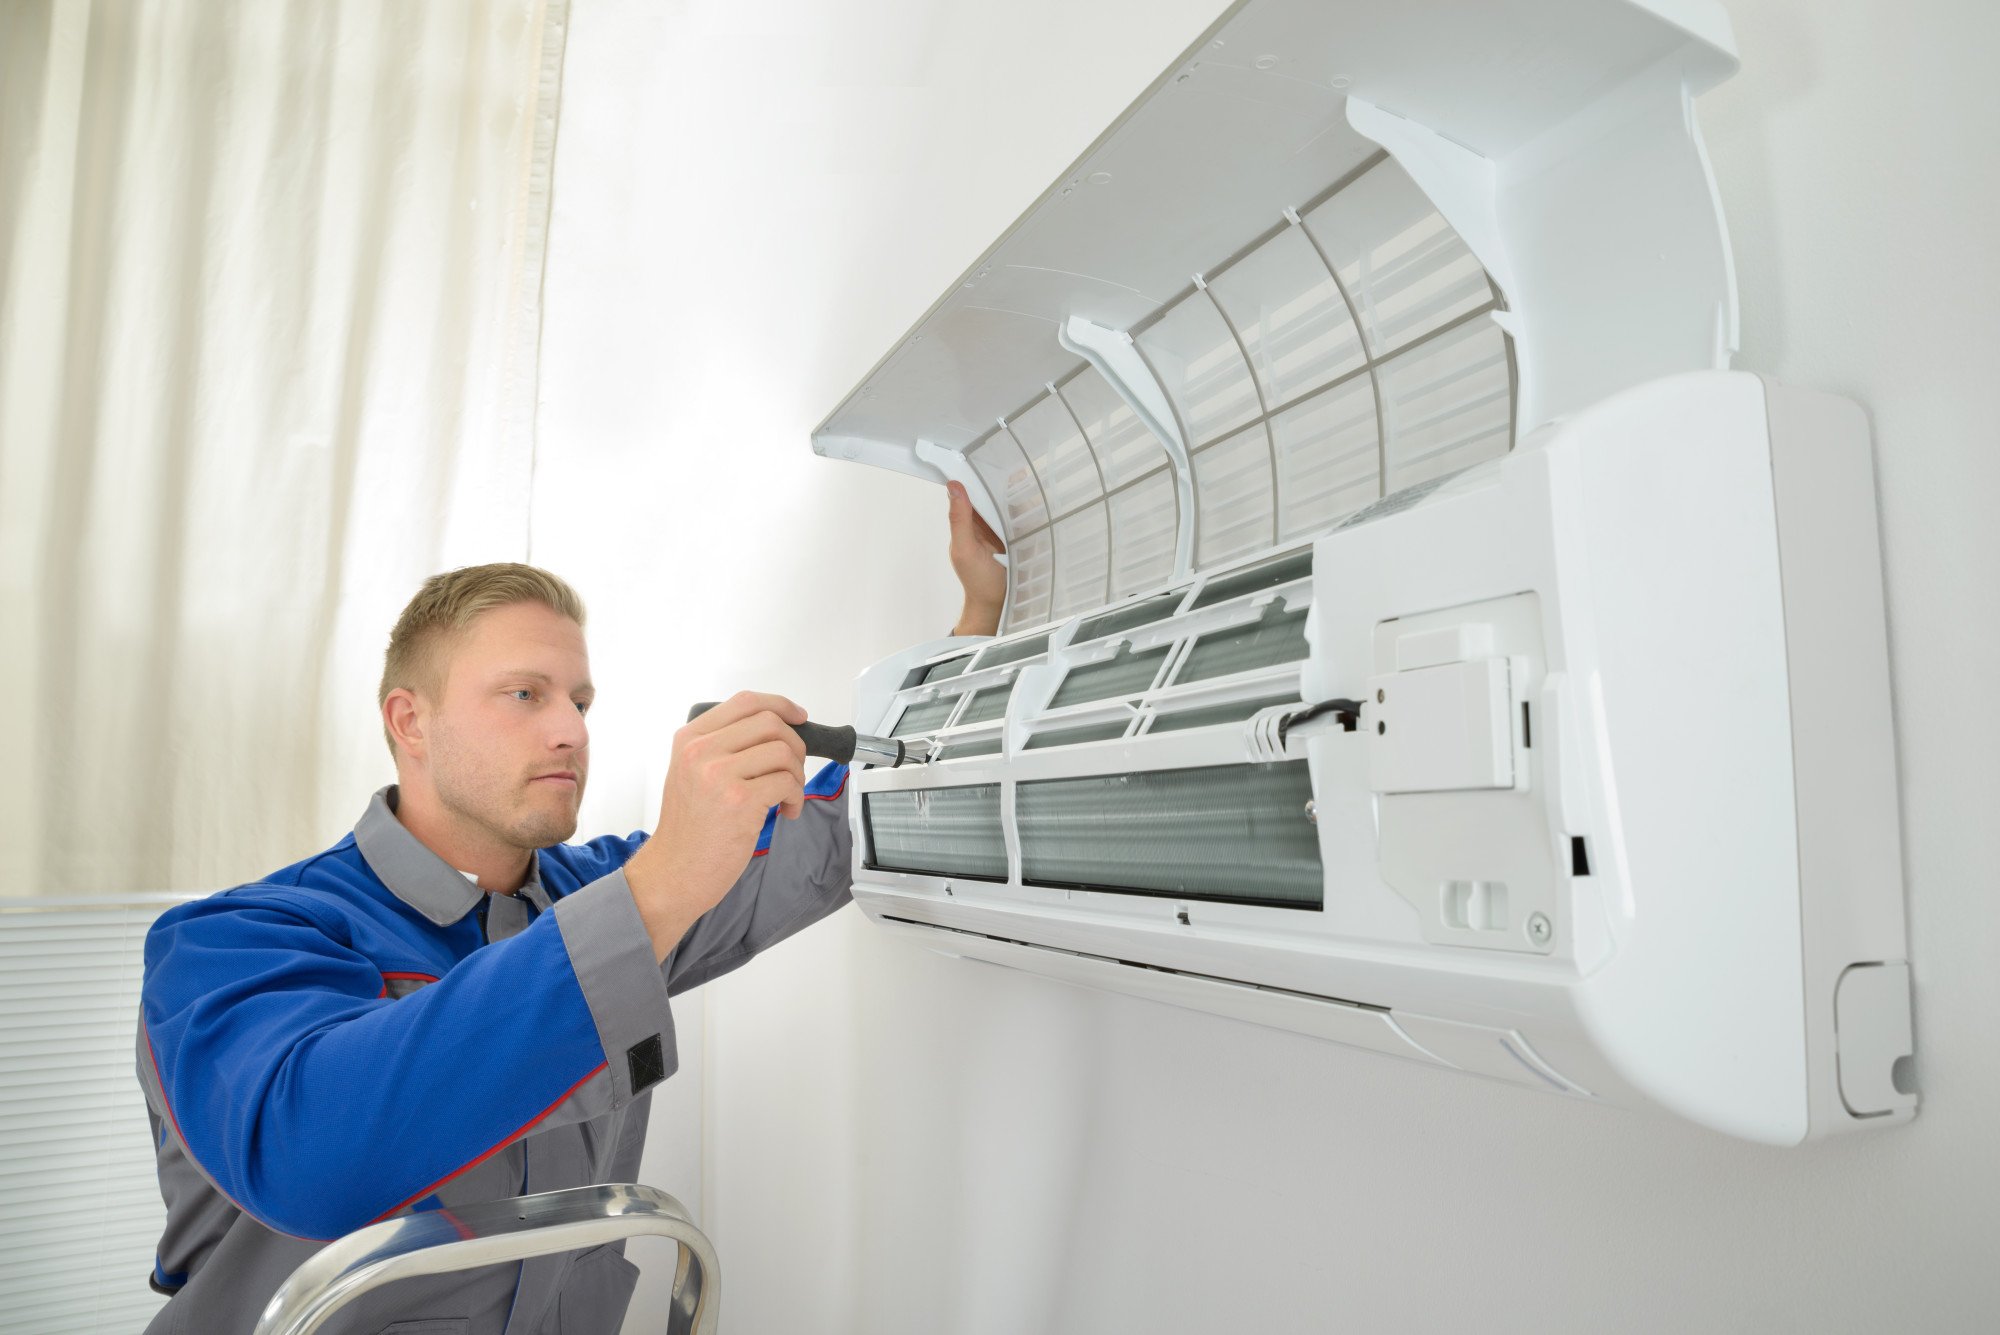 Are you familiar with what to include on an AC maintenance checklist? Learn about it in this brief guide, including air filters, thermostats, and more.